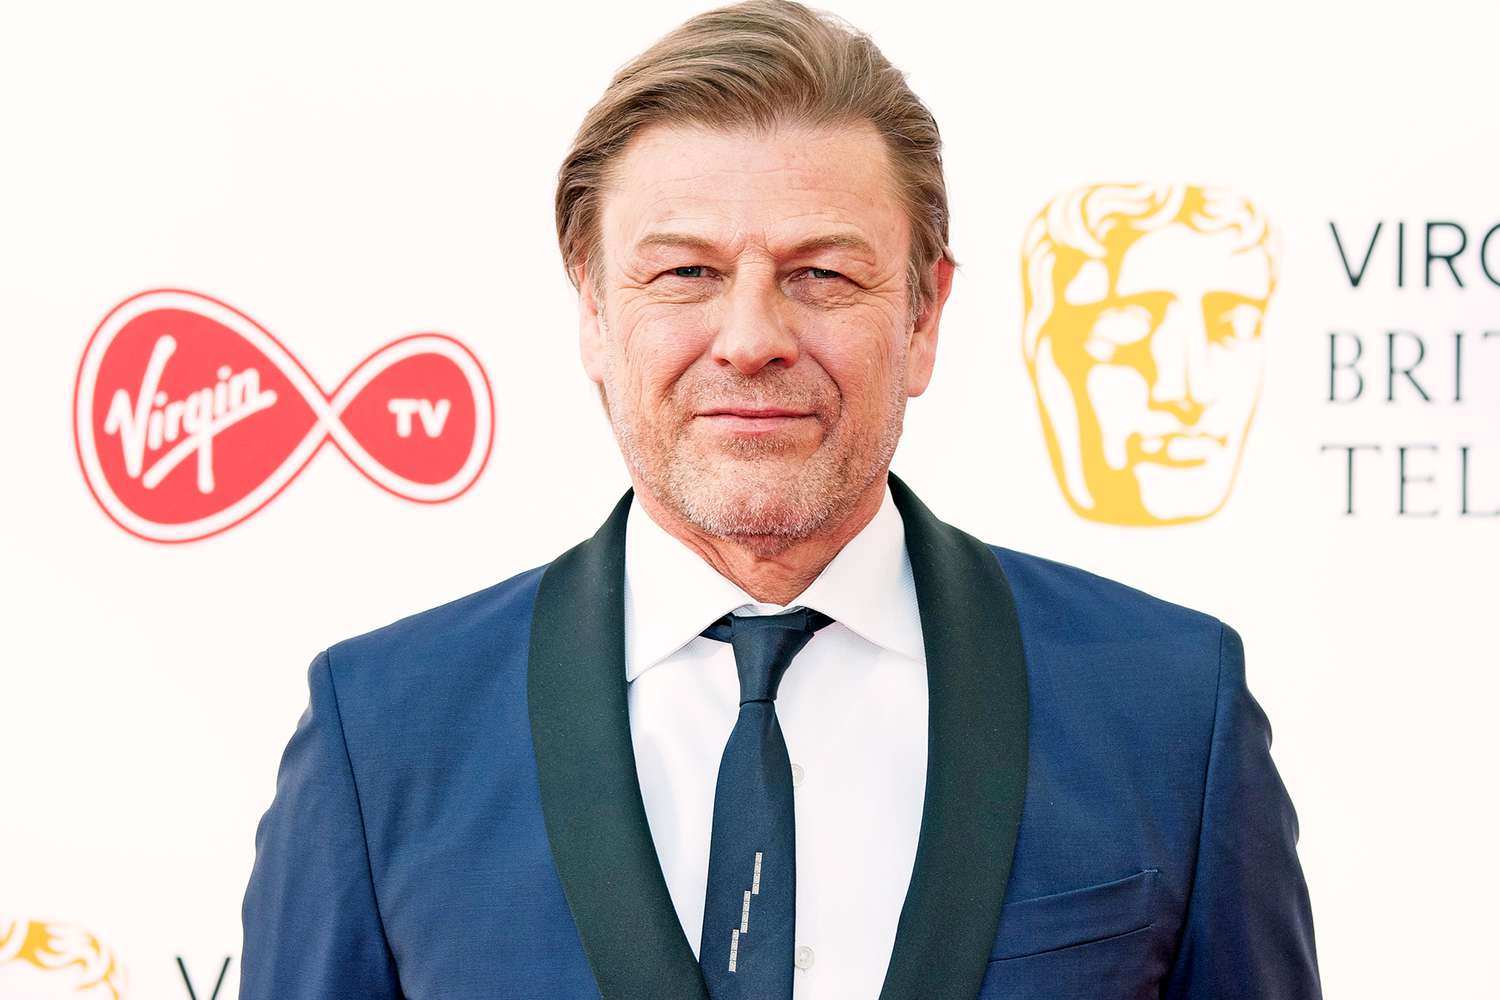 LONDON, ENGLAND - MAY 13: Sean Bean attends the Virgin TV British Academy Television Awards at The Royal Festival Hall on May 13, 2018 in London, England. (Photo by Jeff Spicer/Getty Images)